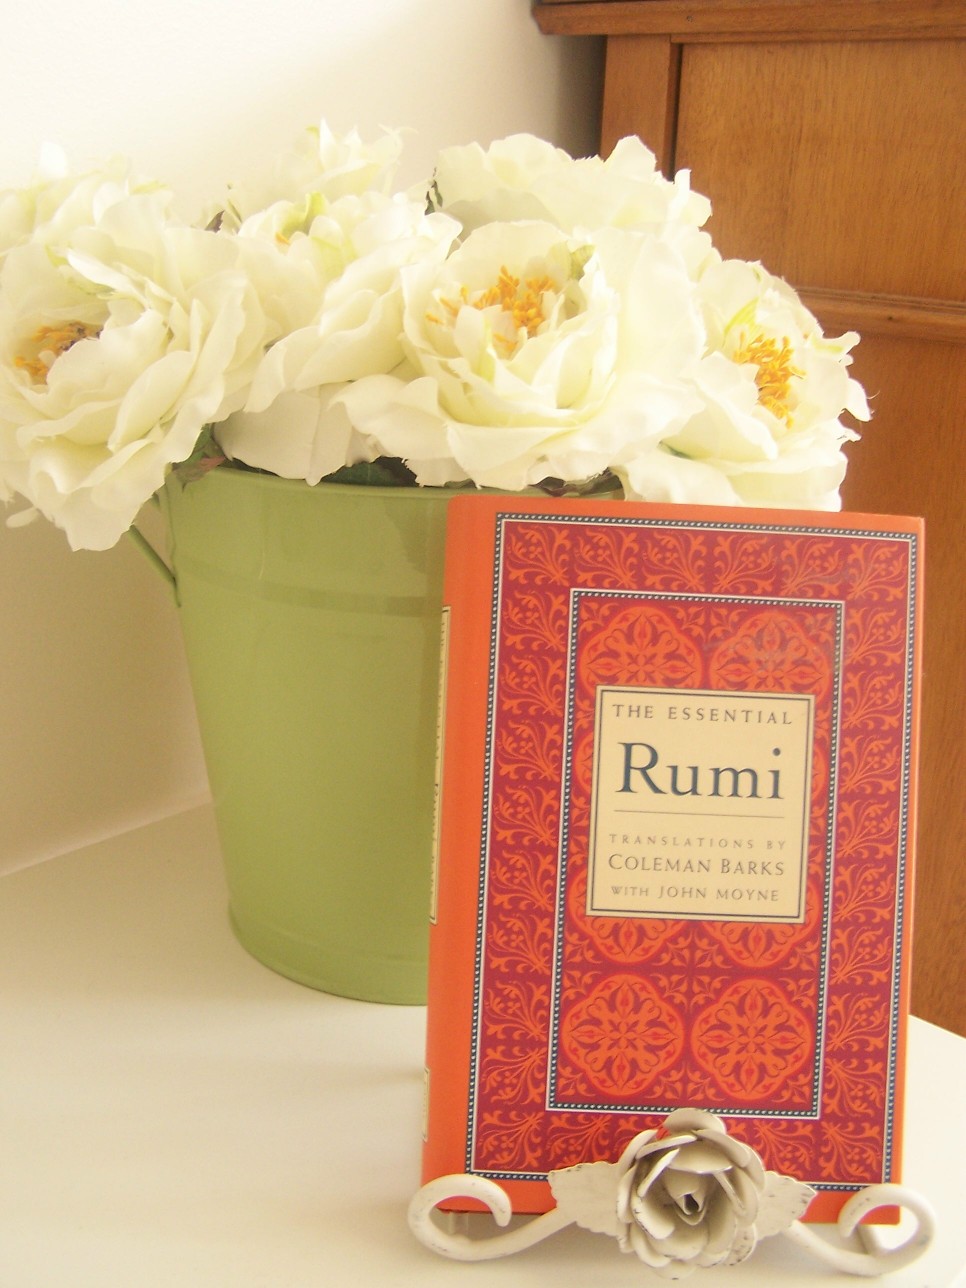 [The+essential+Rumi+by+Coleman+barks.jpg]